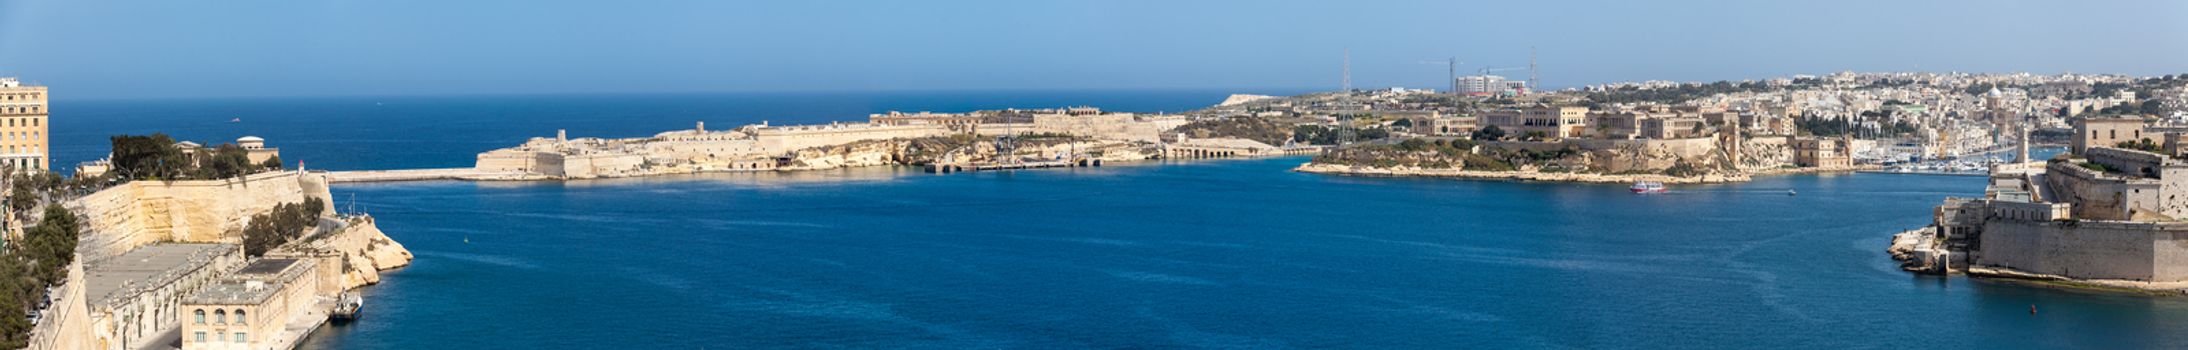 A view of the Grand Harbour in Malta, as seen from Upper Barrakka Gardens.  Left to Right: Lower Barrakka Gardens, harbour entrance breakwater, Fort Ricasoli, Bighi, Kalkara Creek, Fort St. Angelo